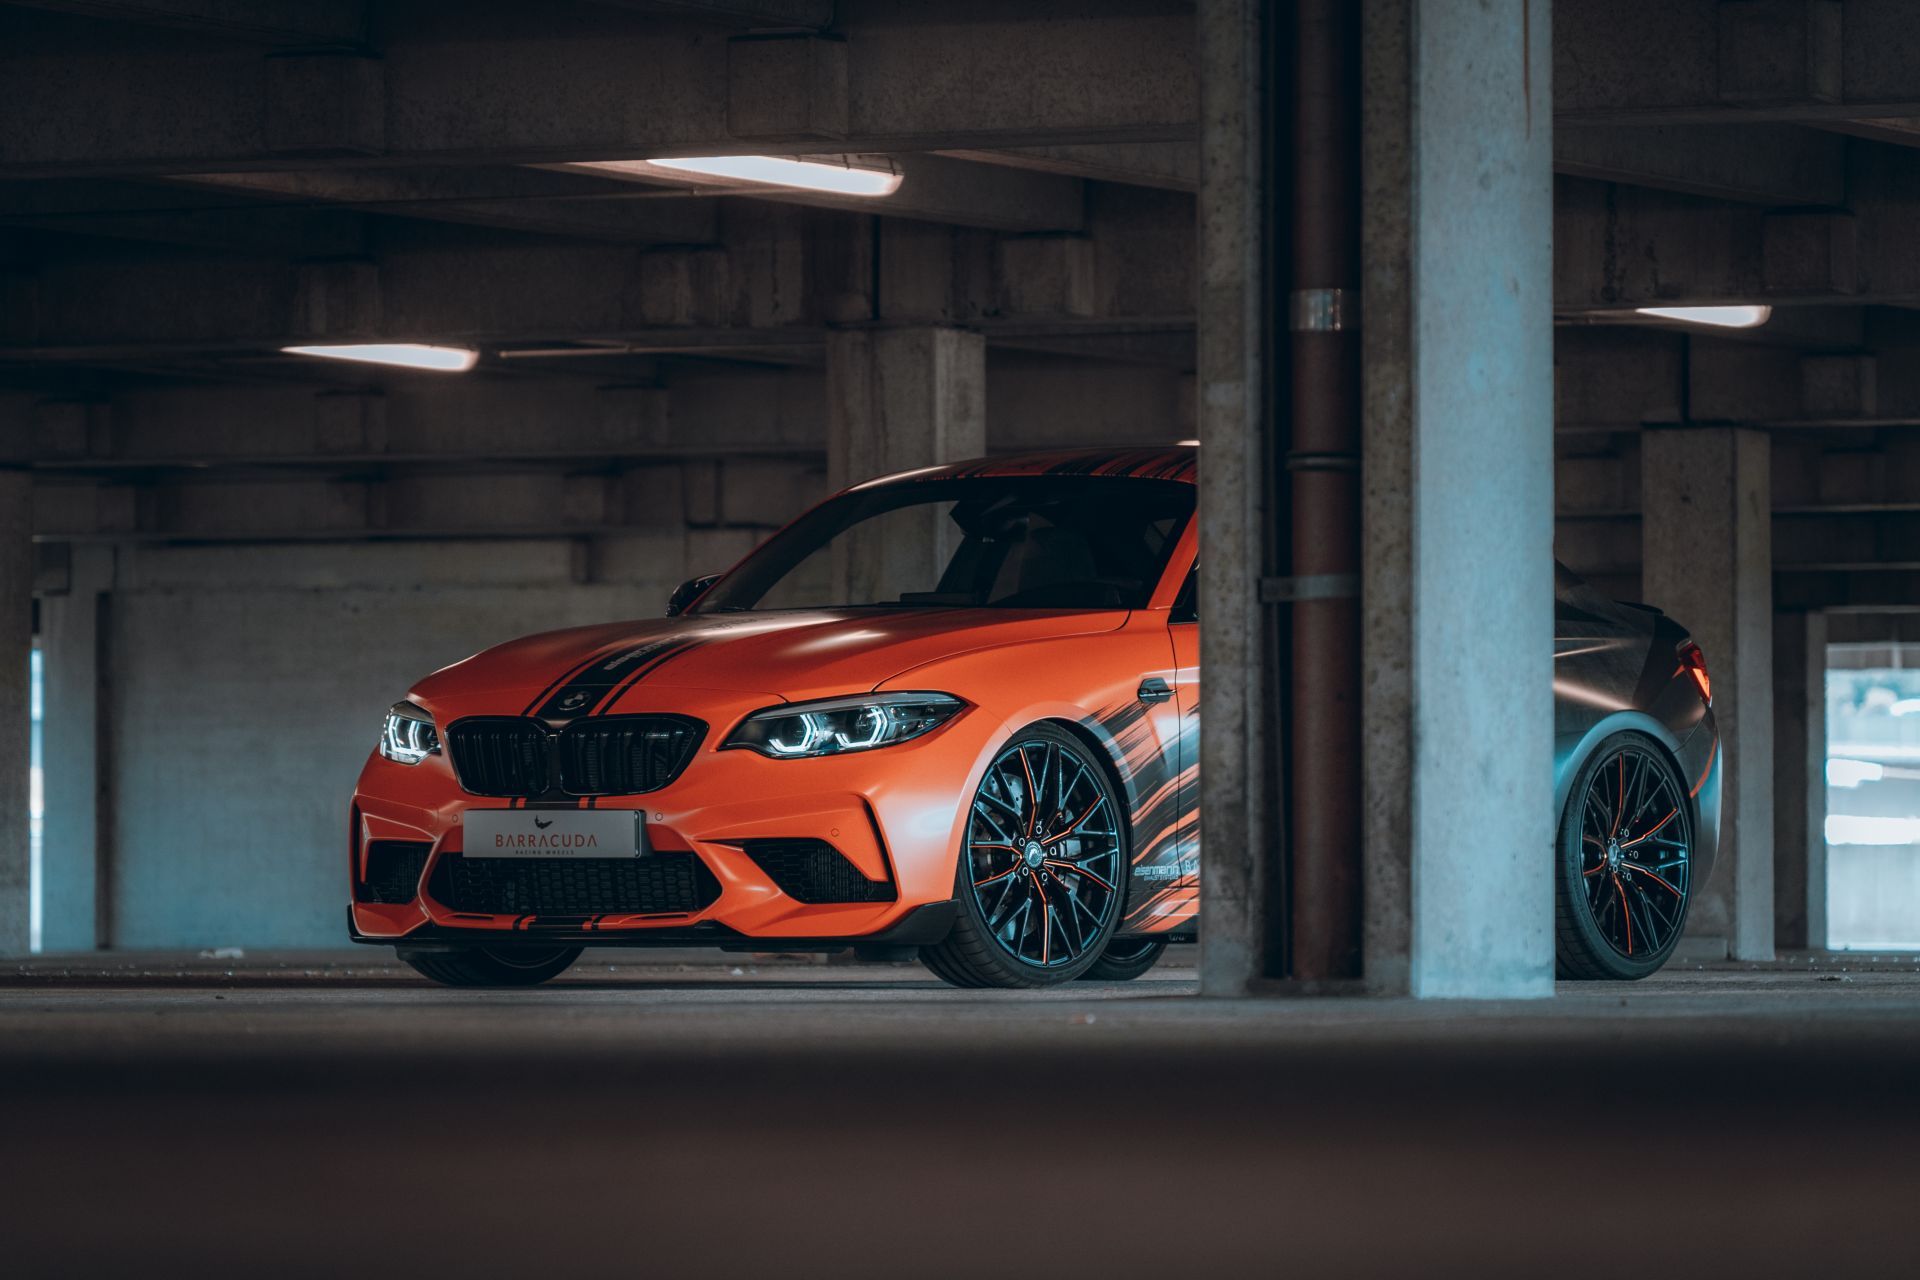 BMW M2 Competition Gets A Racing Style Tuning Job, Do You Approve